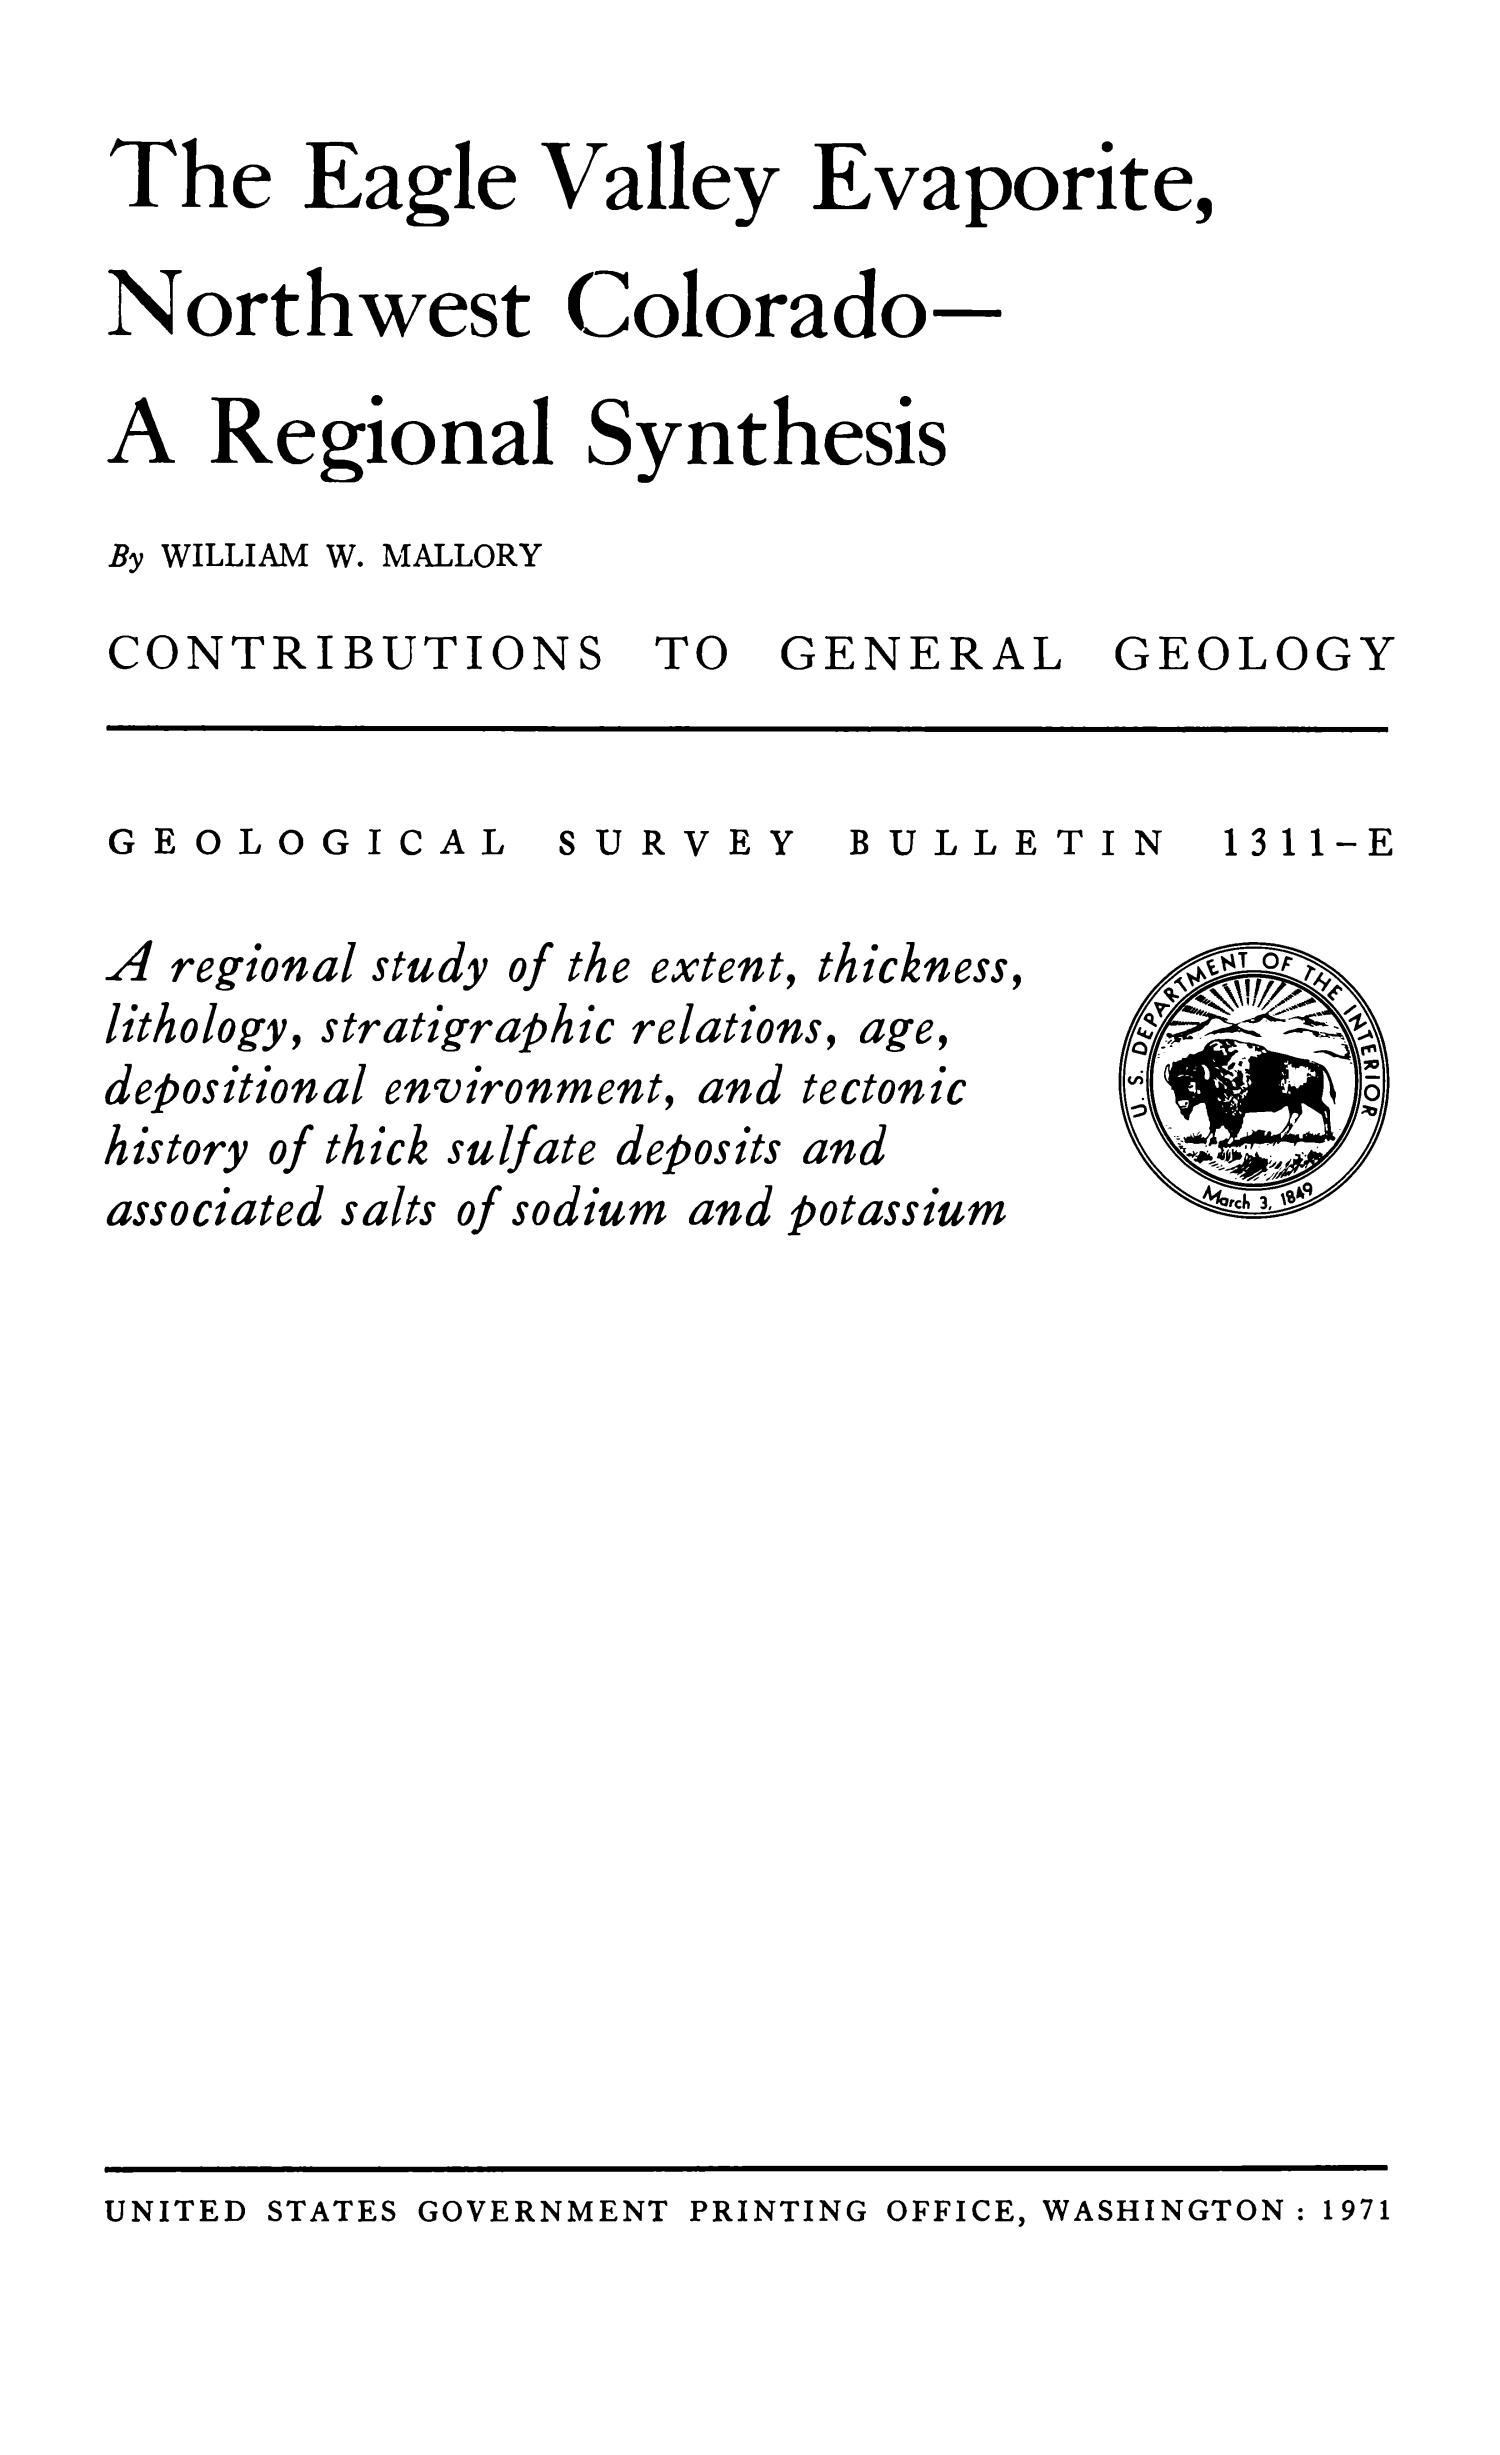 The Eagle Valley Evaporite, Northwest Colorado--A Regional Synthesis
                                                
                                                    Title Page
                                                